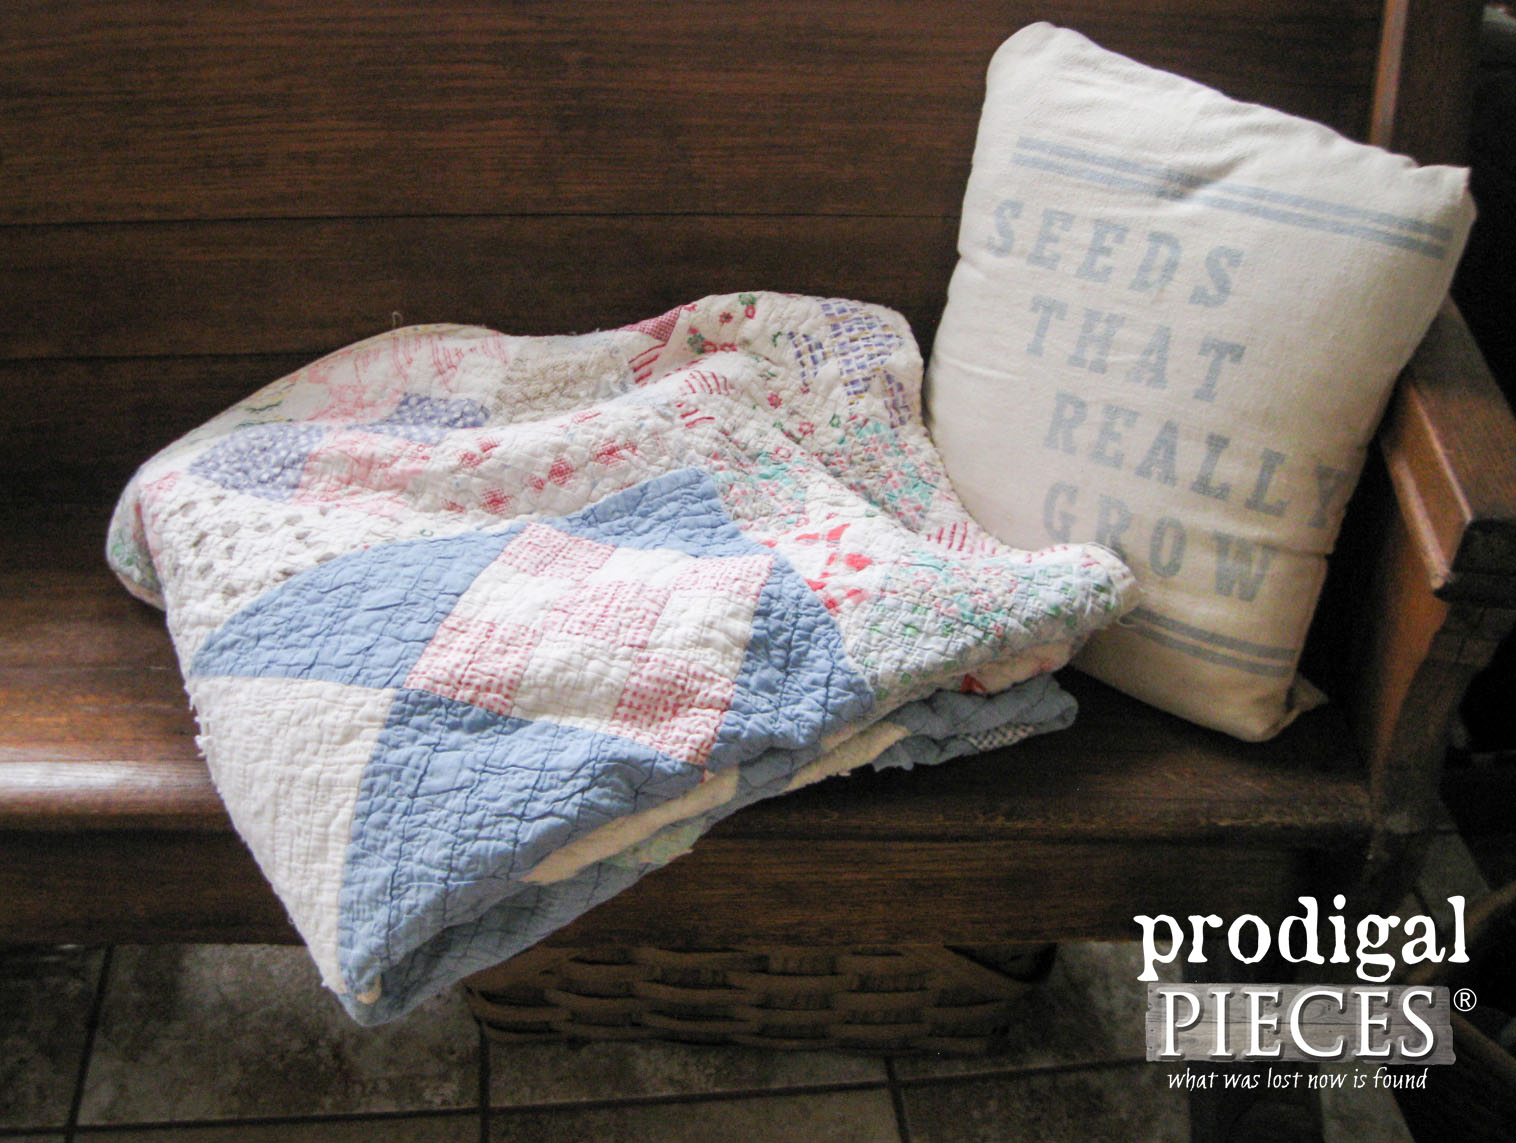 Worn out Handmade Quilt becomes Upcycled Christmas Decor | Prodigal Pieces | www.prodigalpieces.com